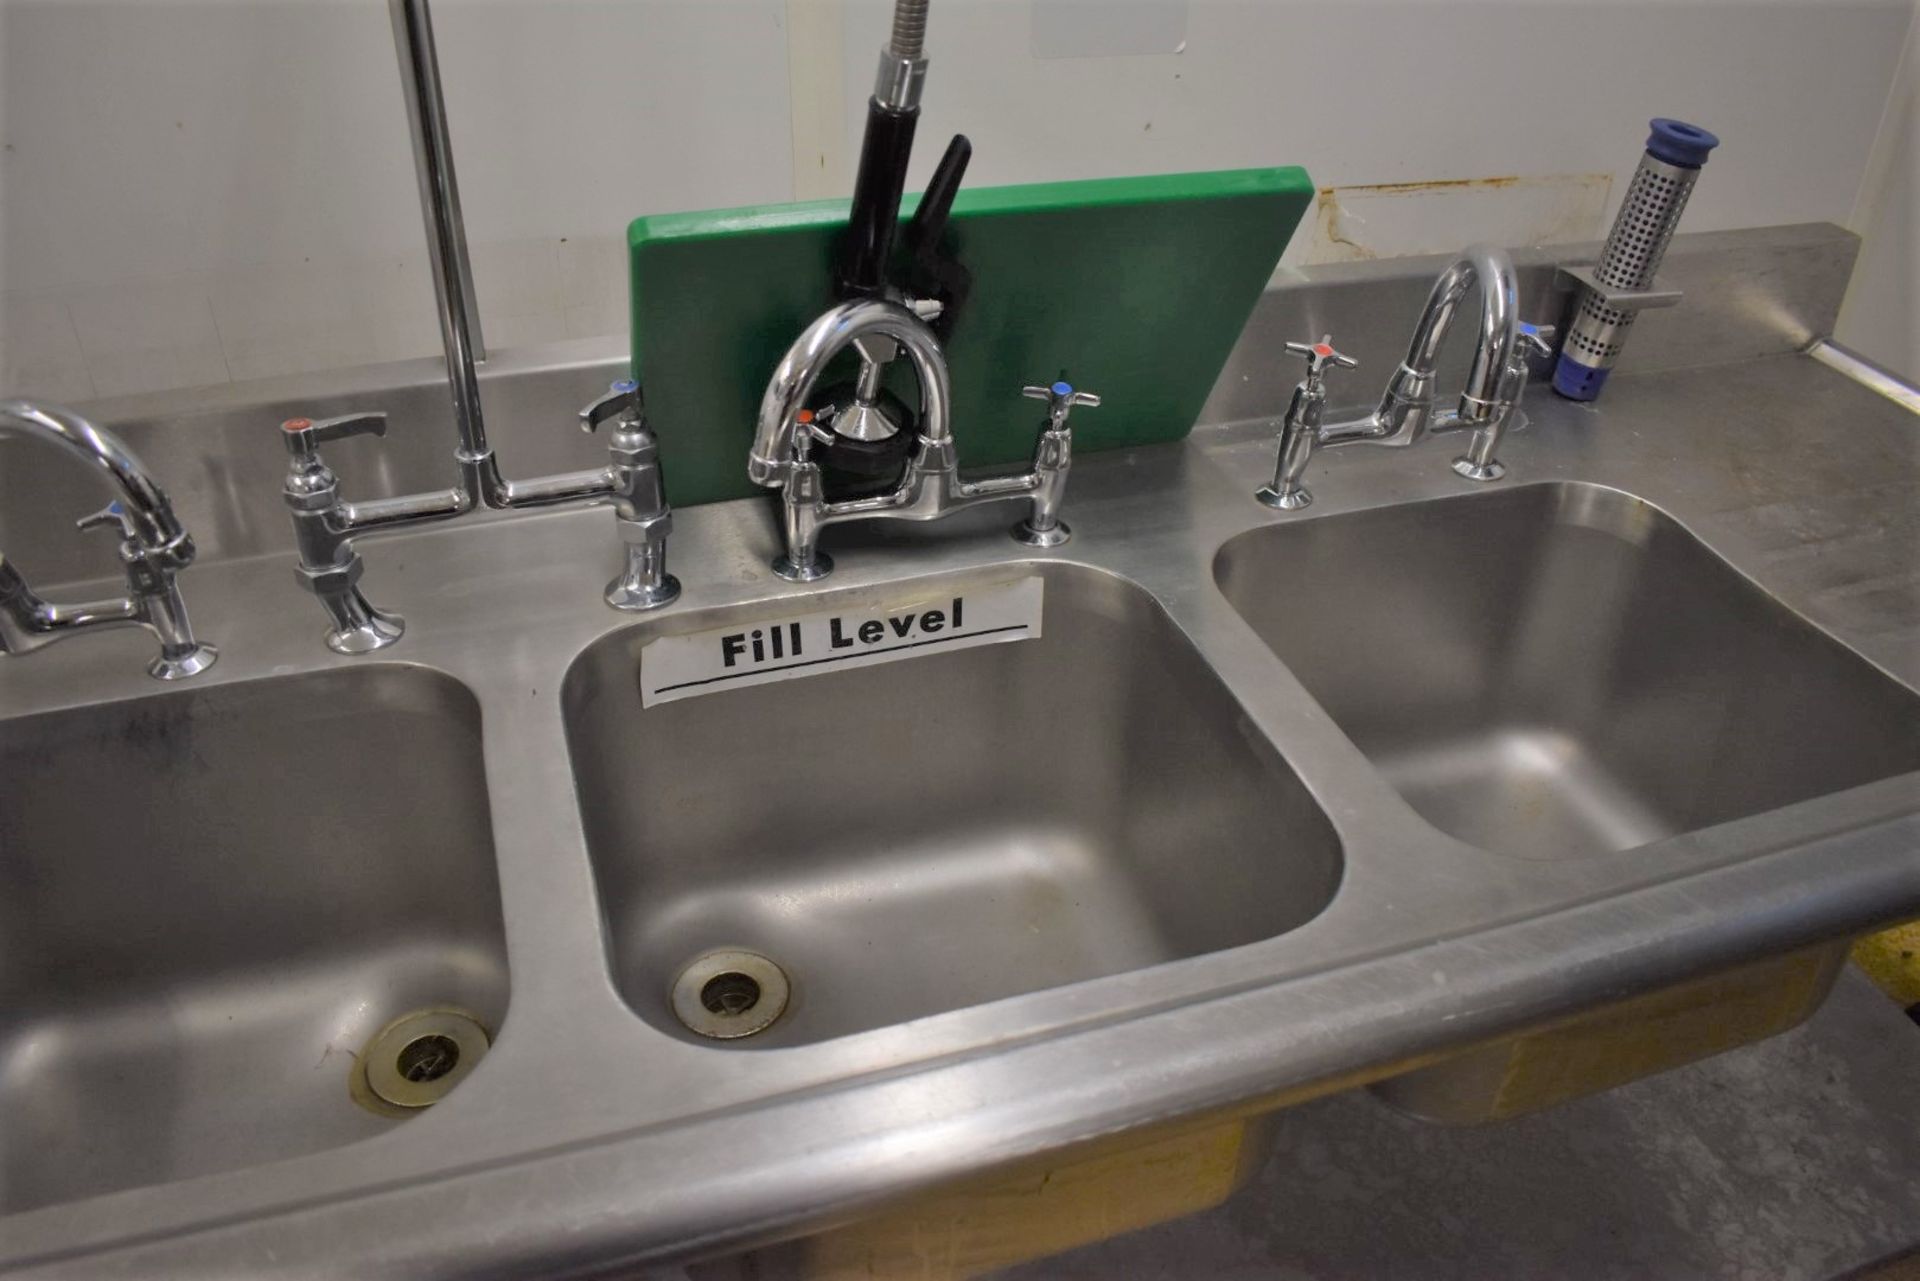 1 x Large Stainless Steel Wash Unit With Triple Sink Basins, Hose Rinser Tap, Mixer Taps, Drainer, - Image 3 of 6